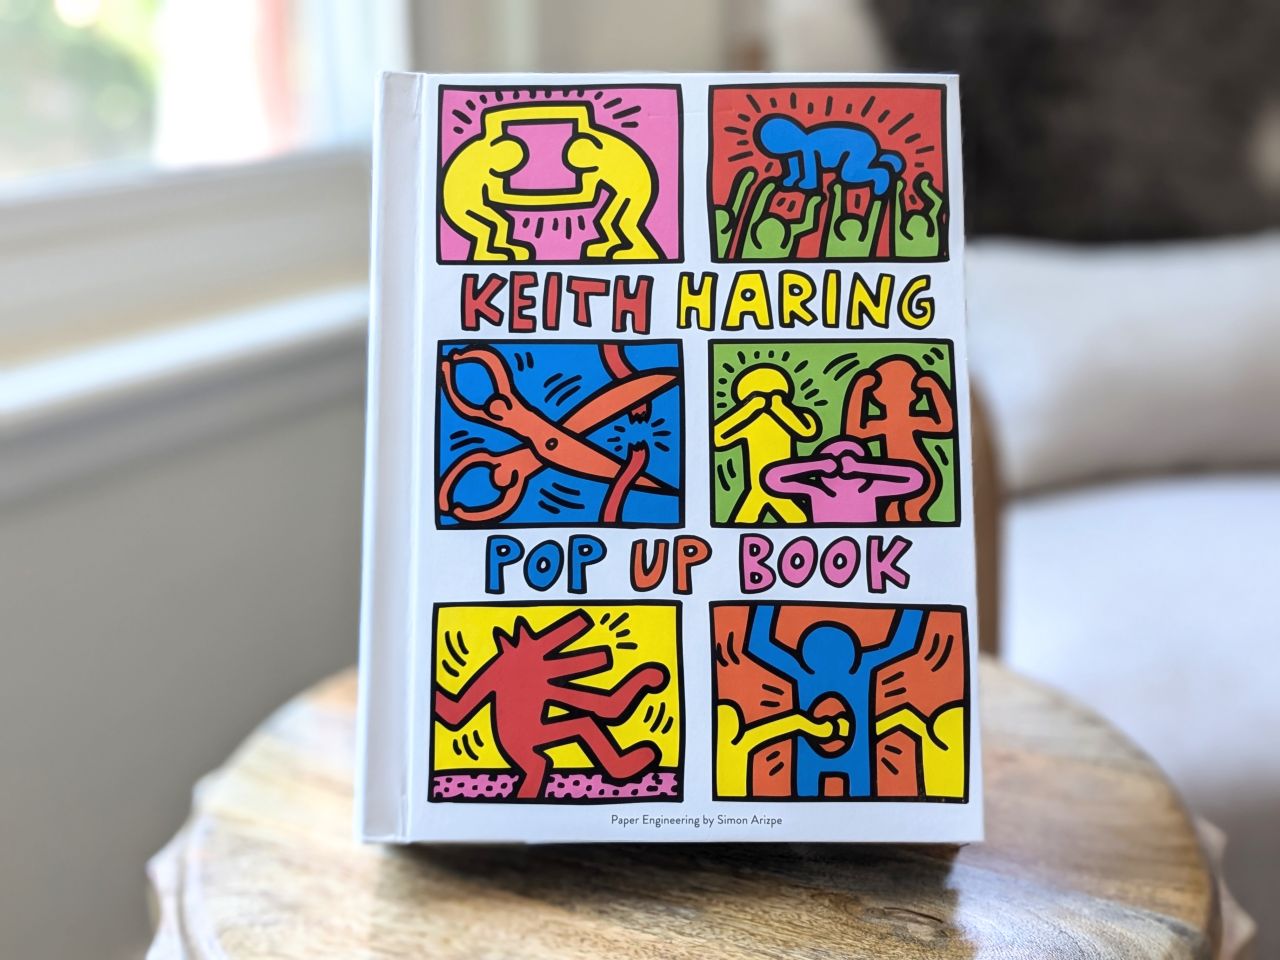 All Keith Haring artwork and quotes © The Keith Haring Foundation